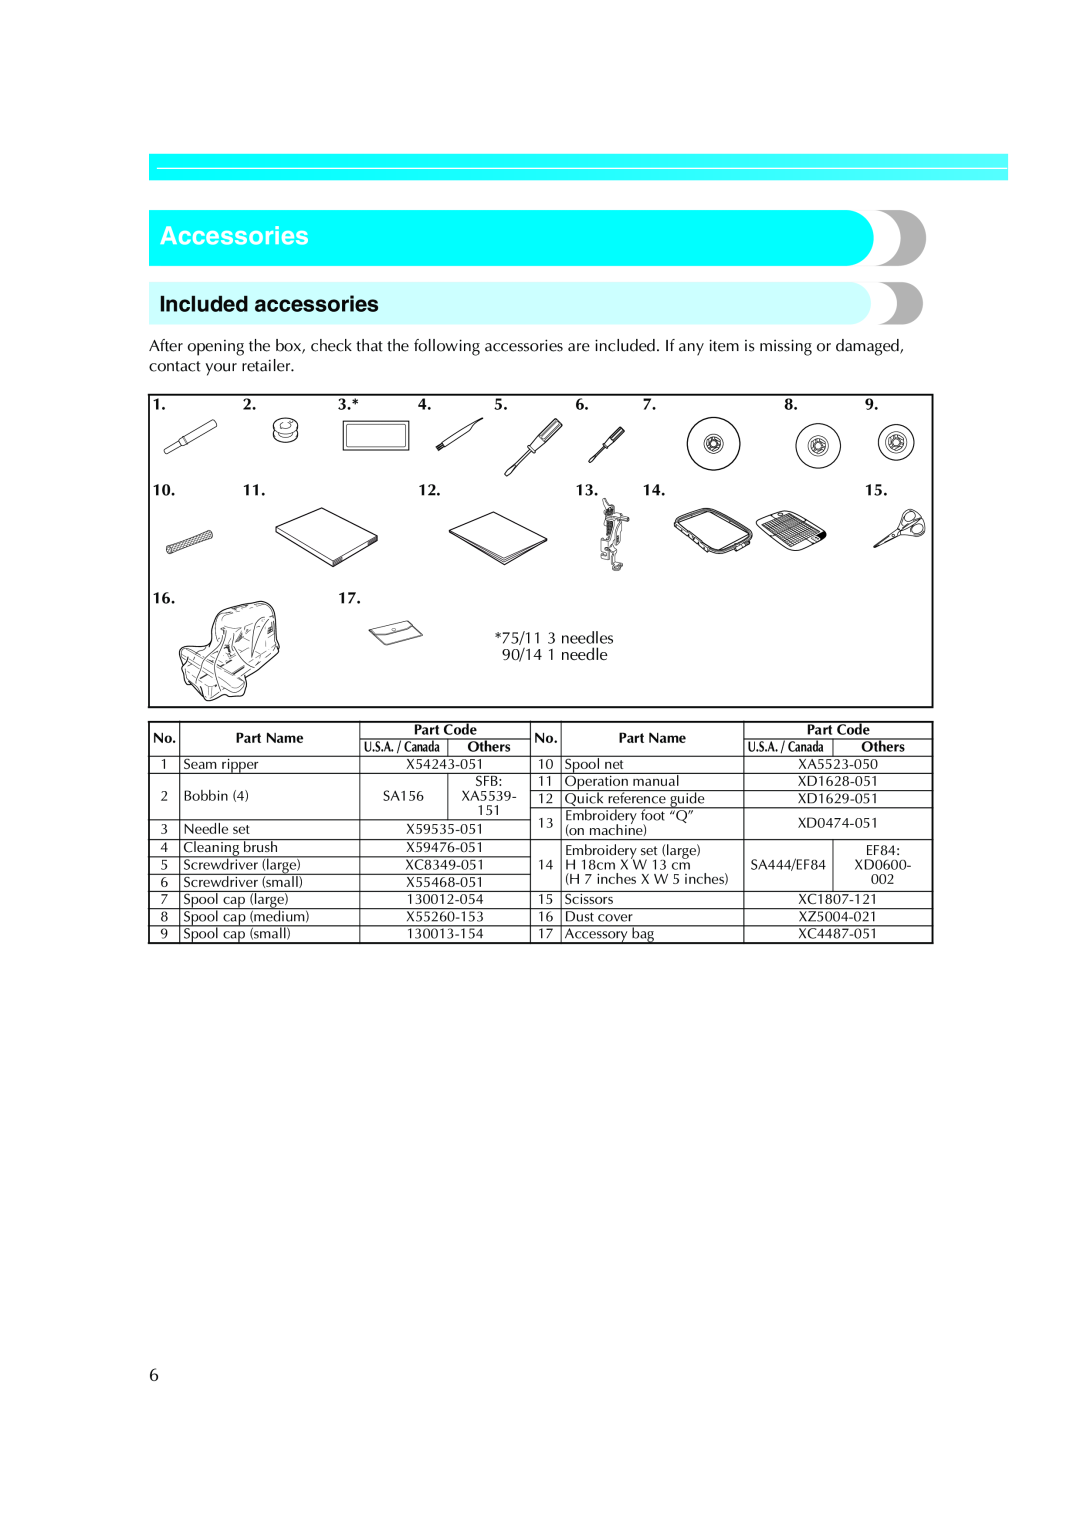 Brother Computerized Embroidery Machine operation manual Accessories, Included accessories 